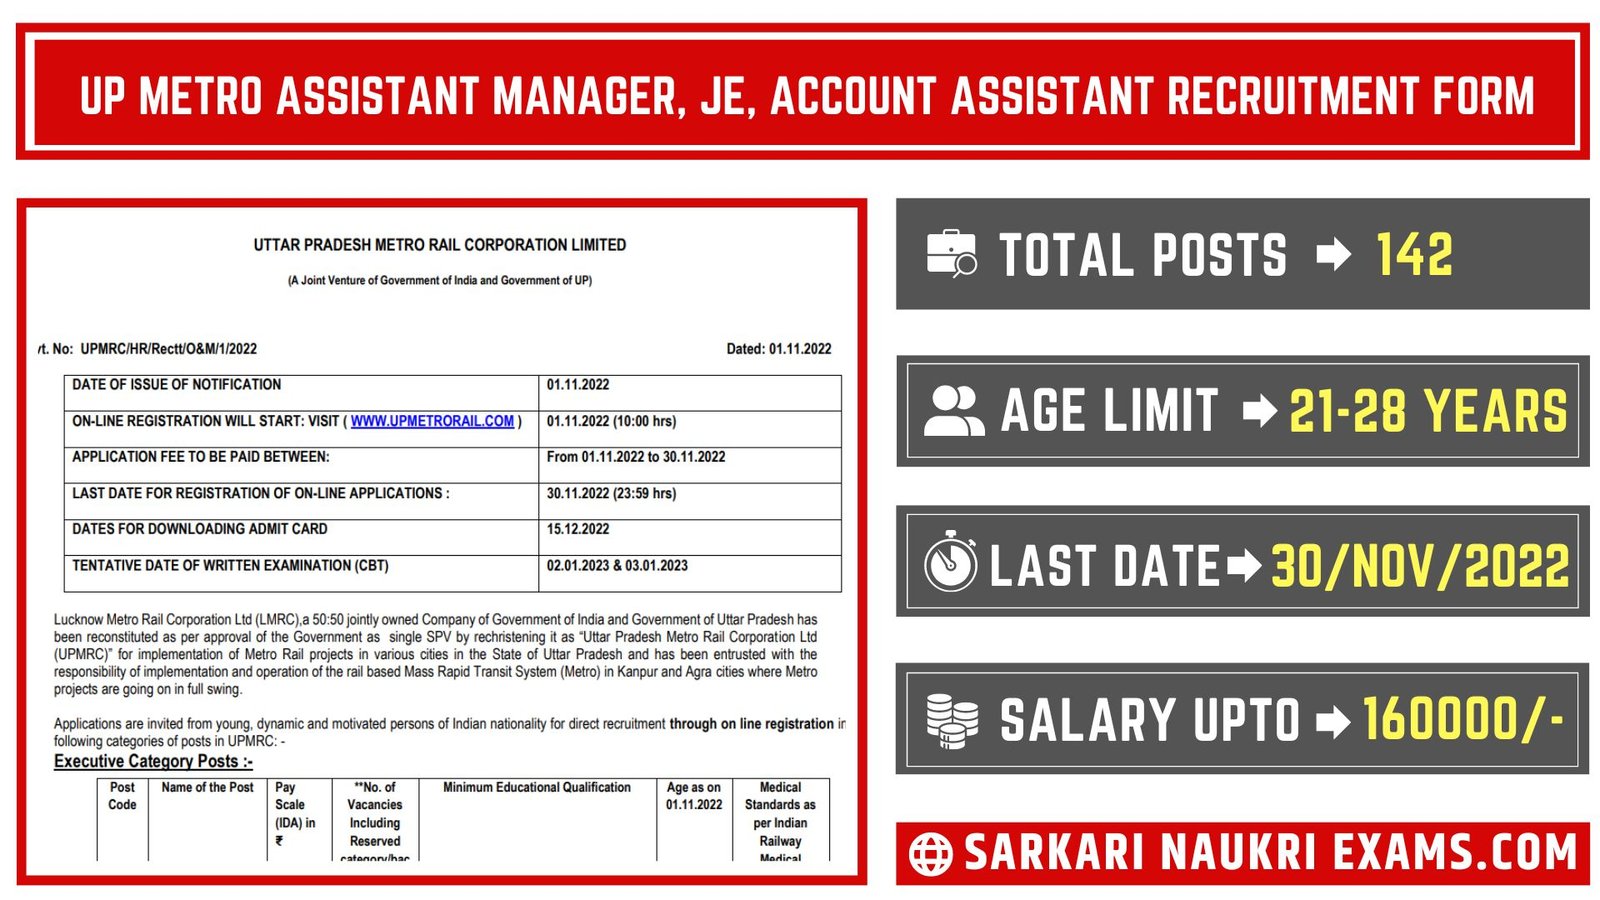 UP Metro Assistant Manager, JE, Account Assistant Recruitment Form 2022